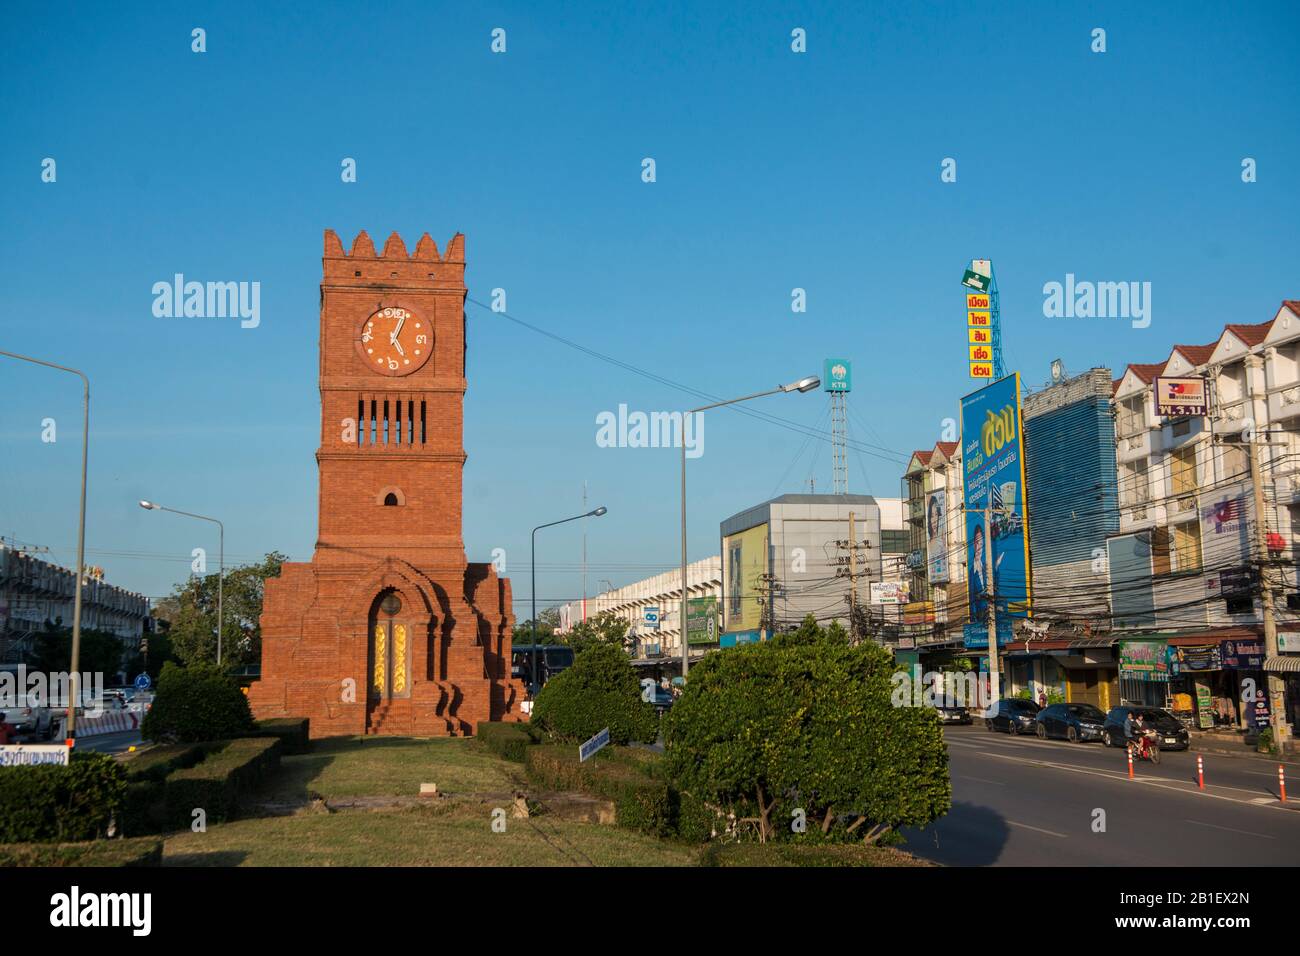 the clock tower in the town of Kamphaeng Phet in the Kamphaeng Phet Province in North Thailand.   Thailand, Kamphaeng Phet, November, 2019 Stock Photo